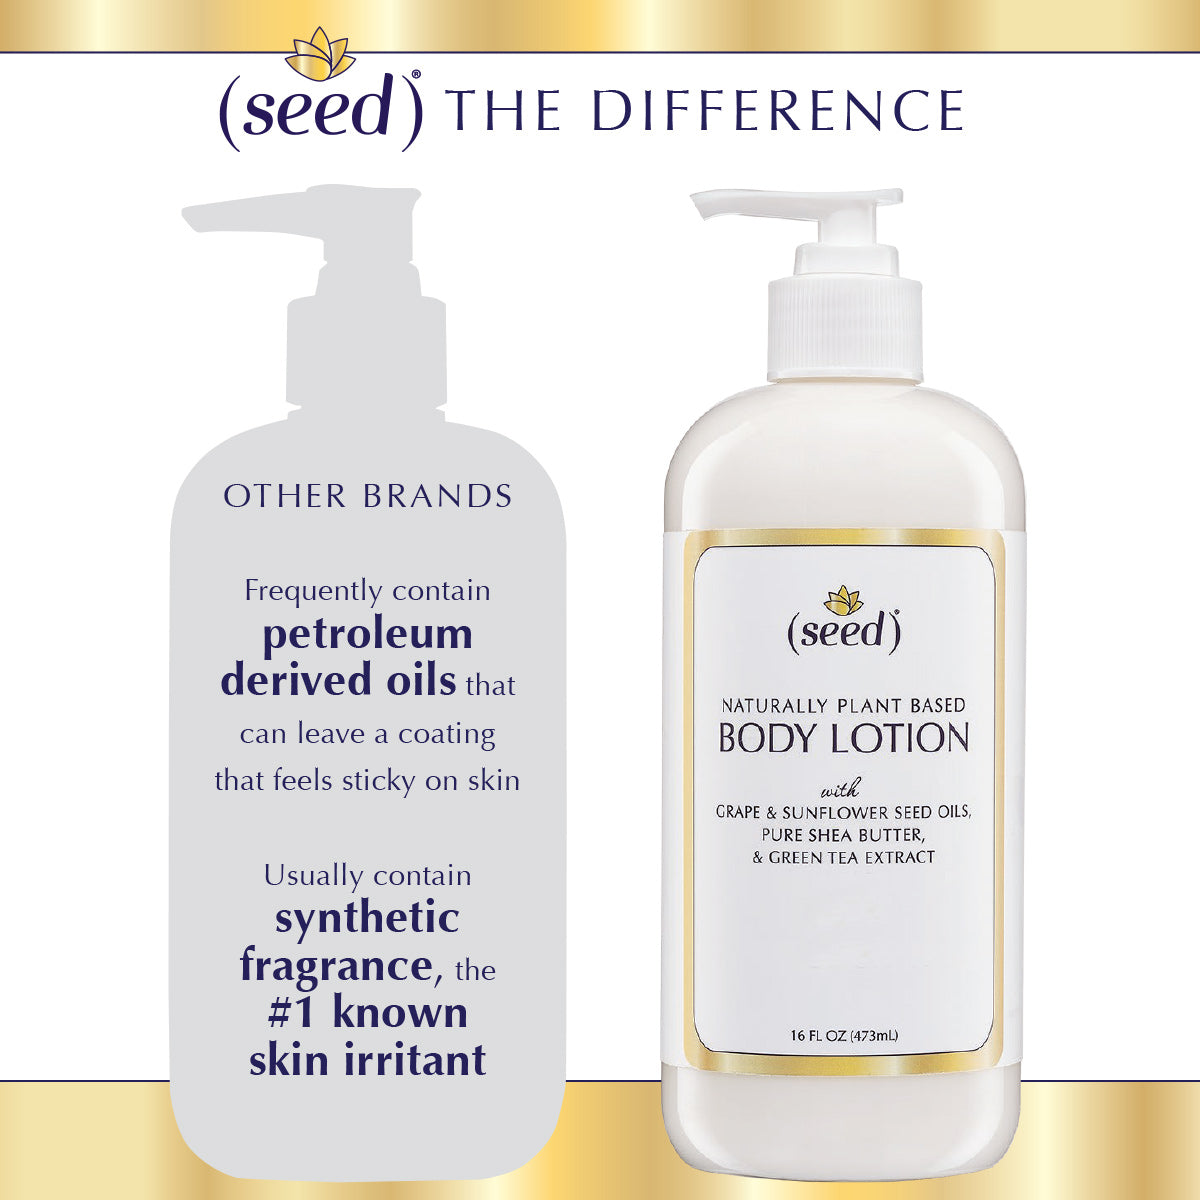 Seed Body Lotion - compare to other brands